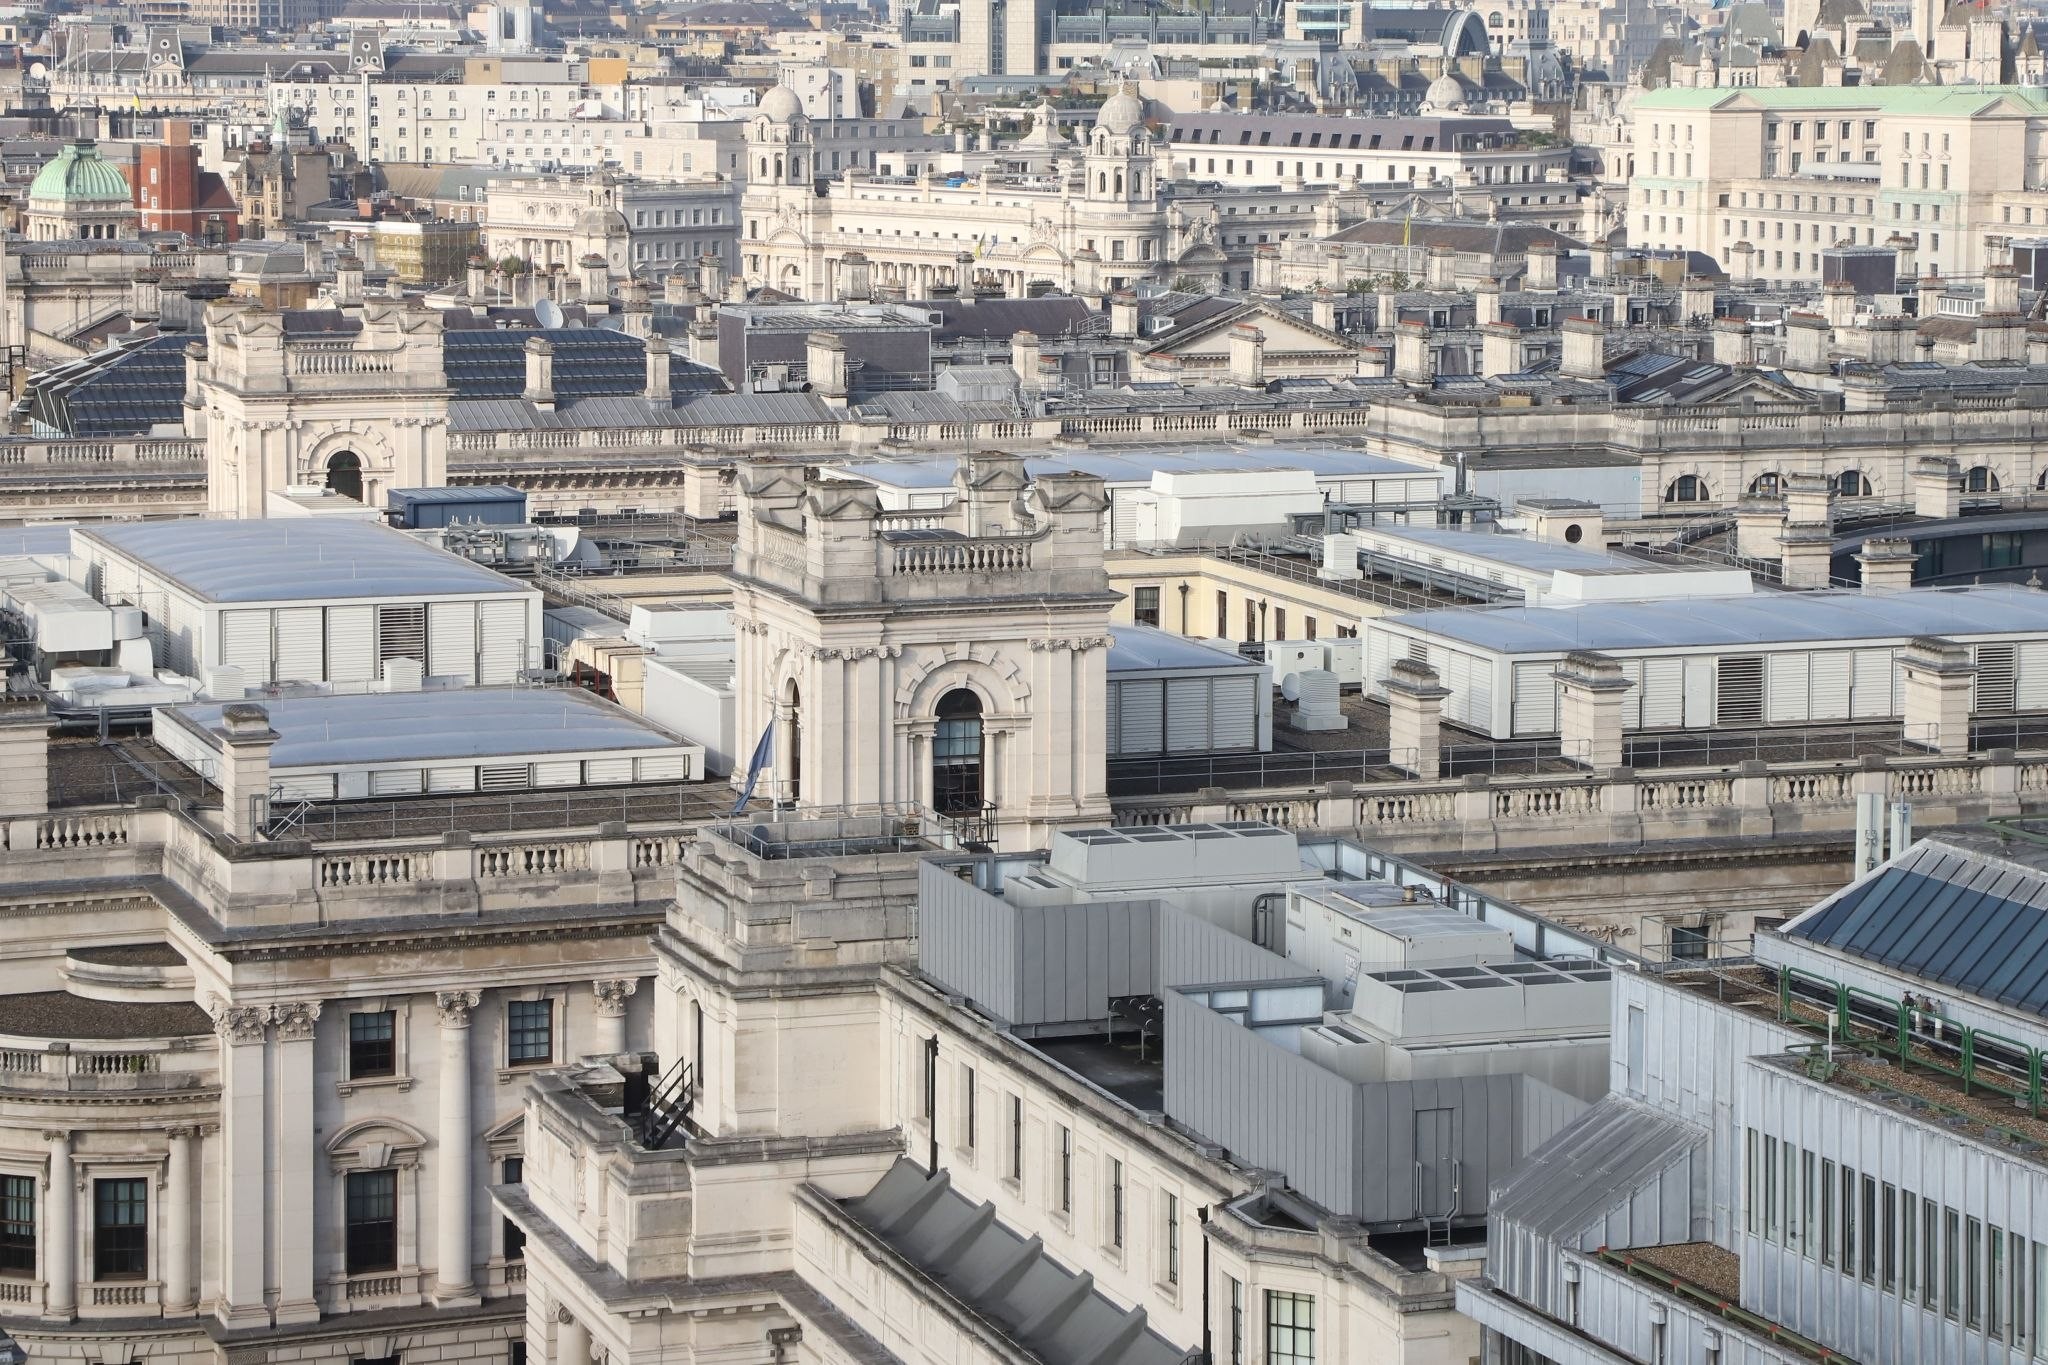 Looking across the rooftops of Whitehall. HM Treasury, Foreign and Commonwealth Office, Downing Street, Horse Guards Parade. View from the balcony of the dome on Methodist Central Hall. 17-Sep-2023.